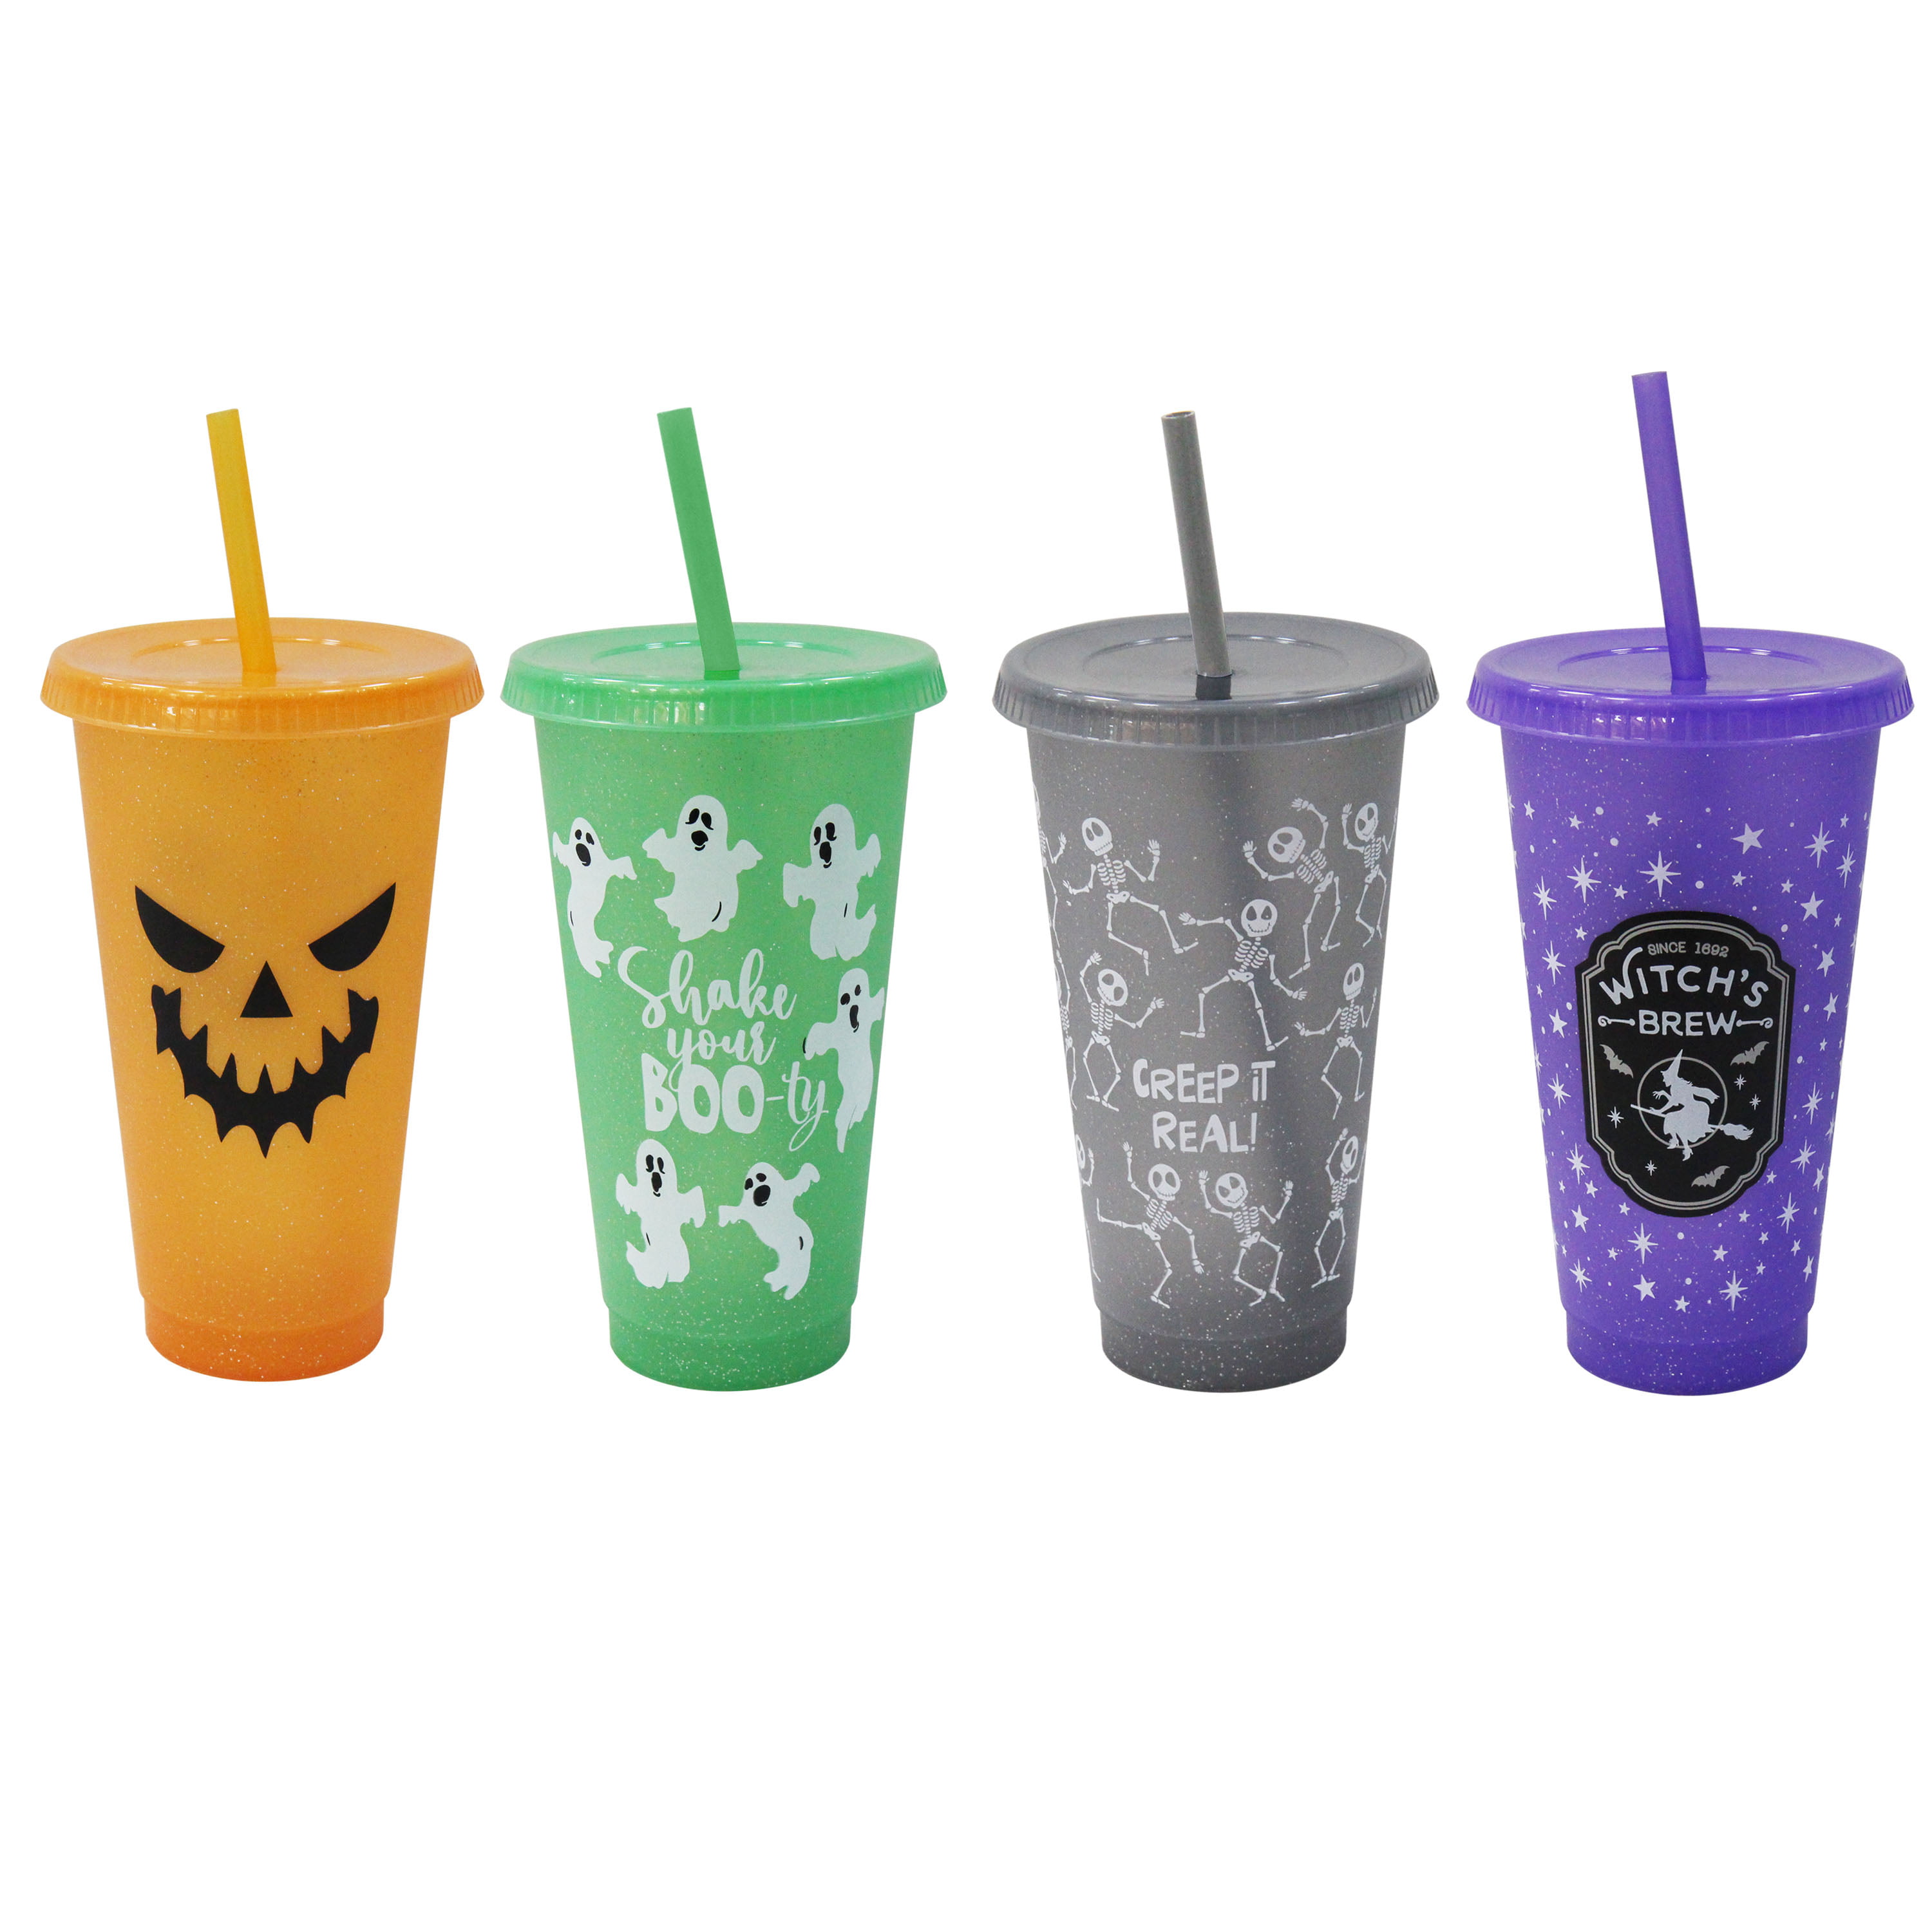 Stop in and get your Halloween Swig tumblers!